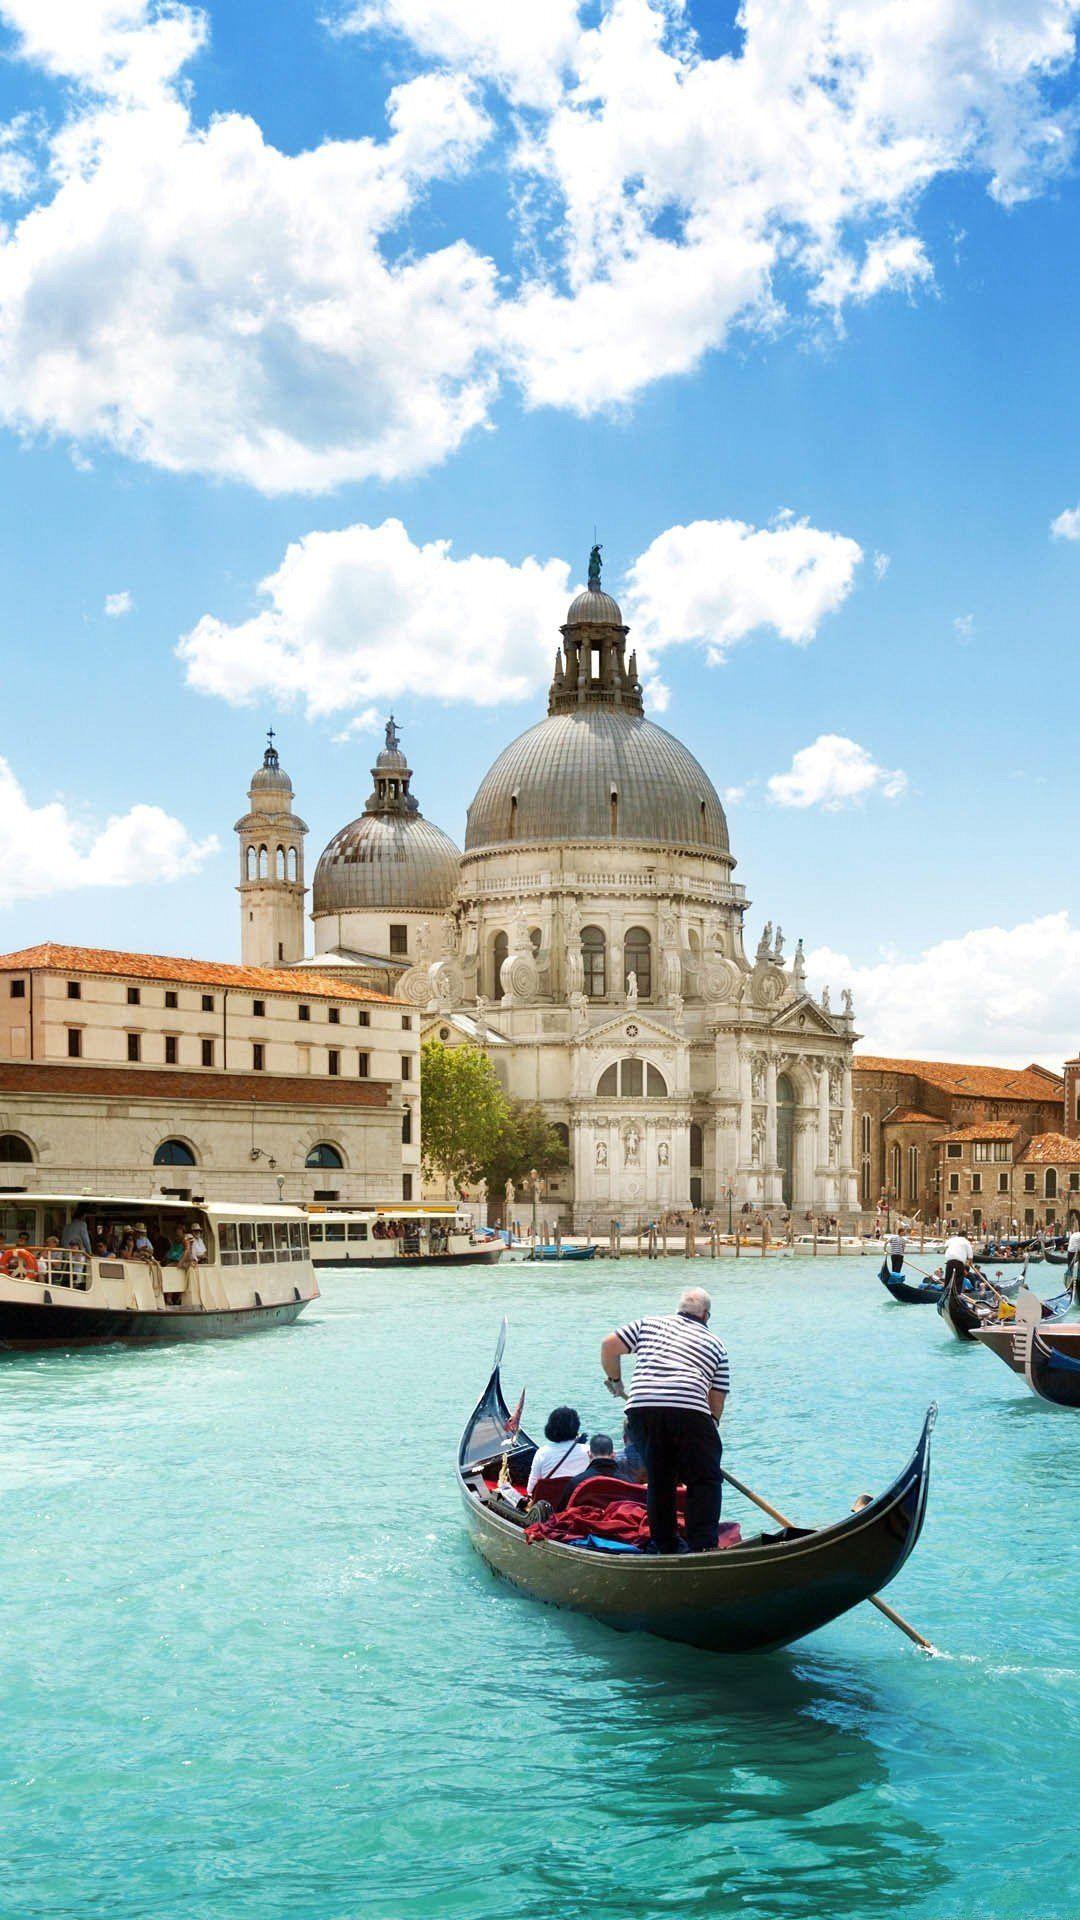 Venice htc one wallpaper, free and easy to download